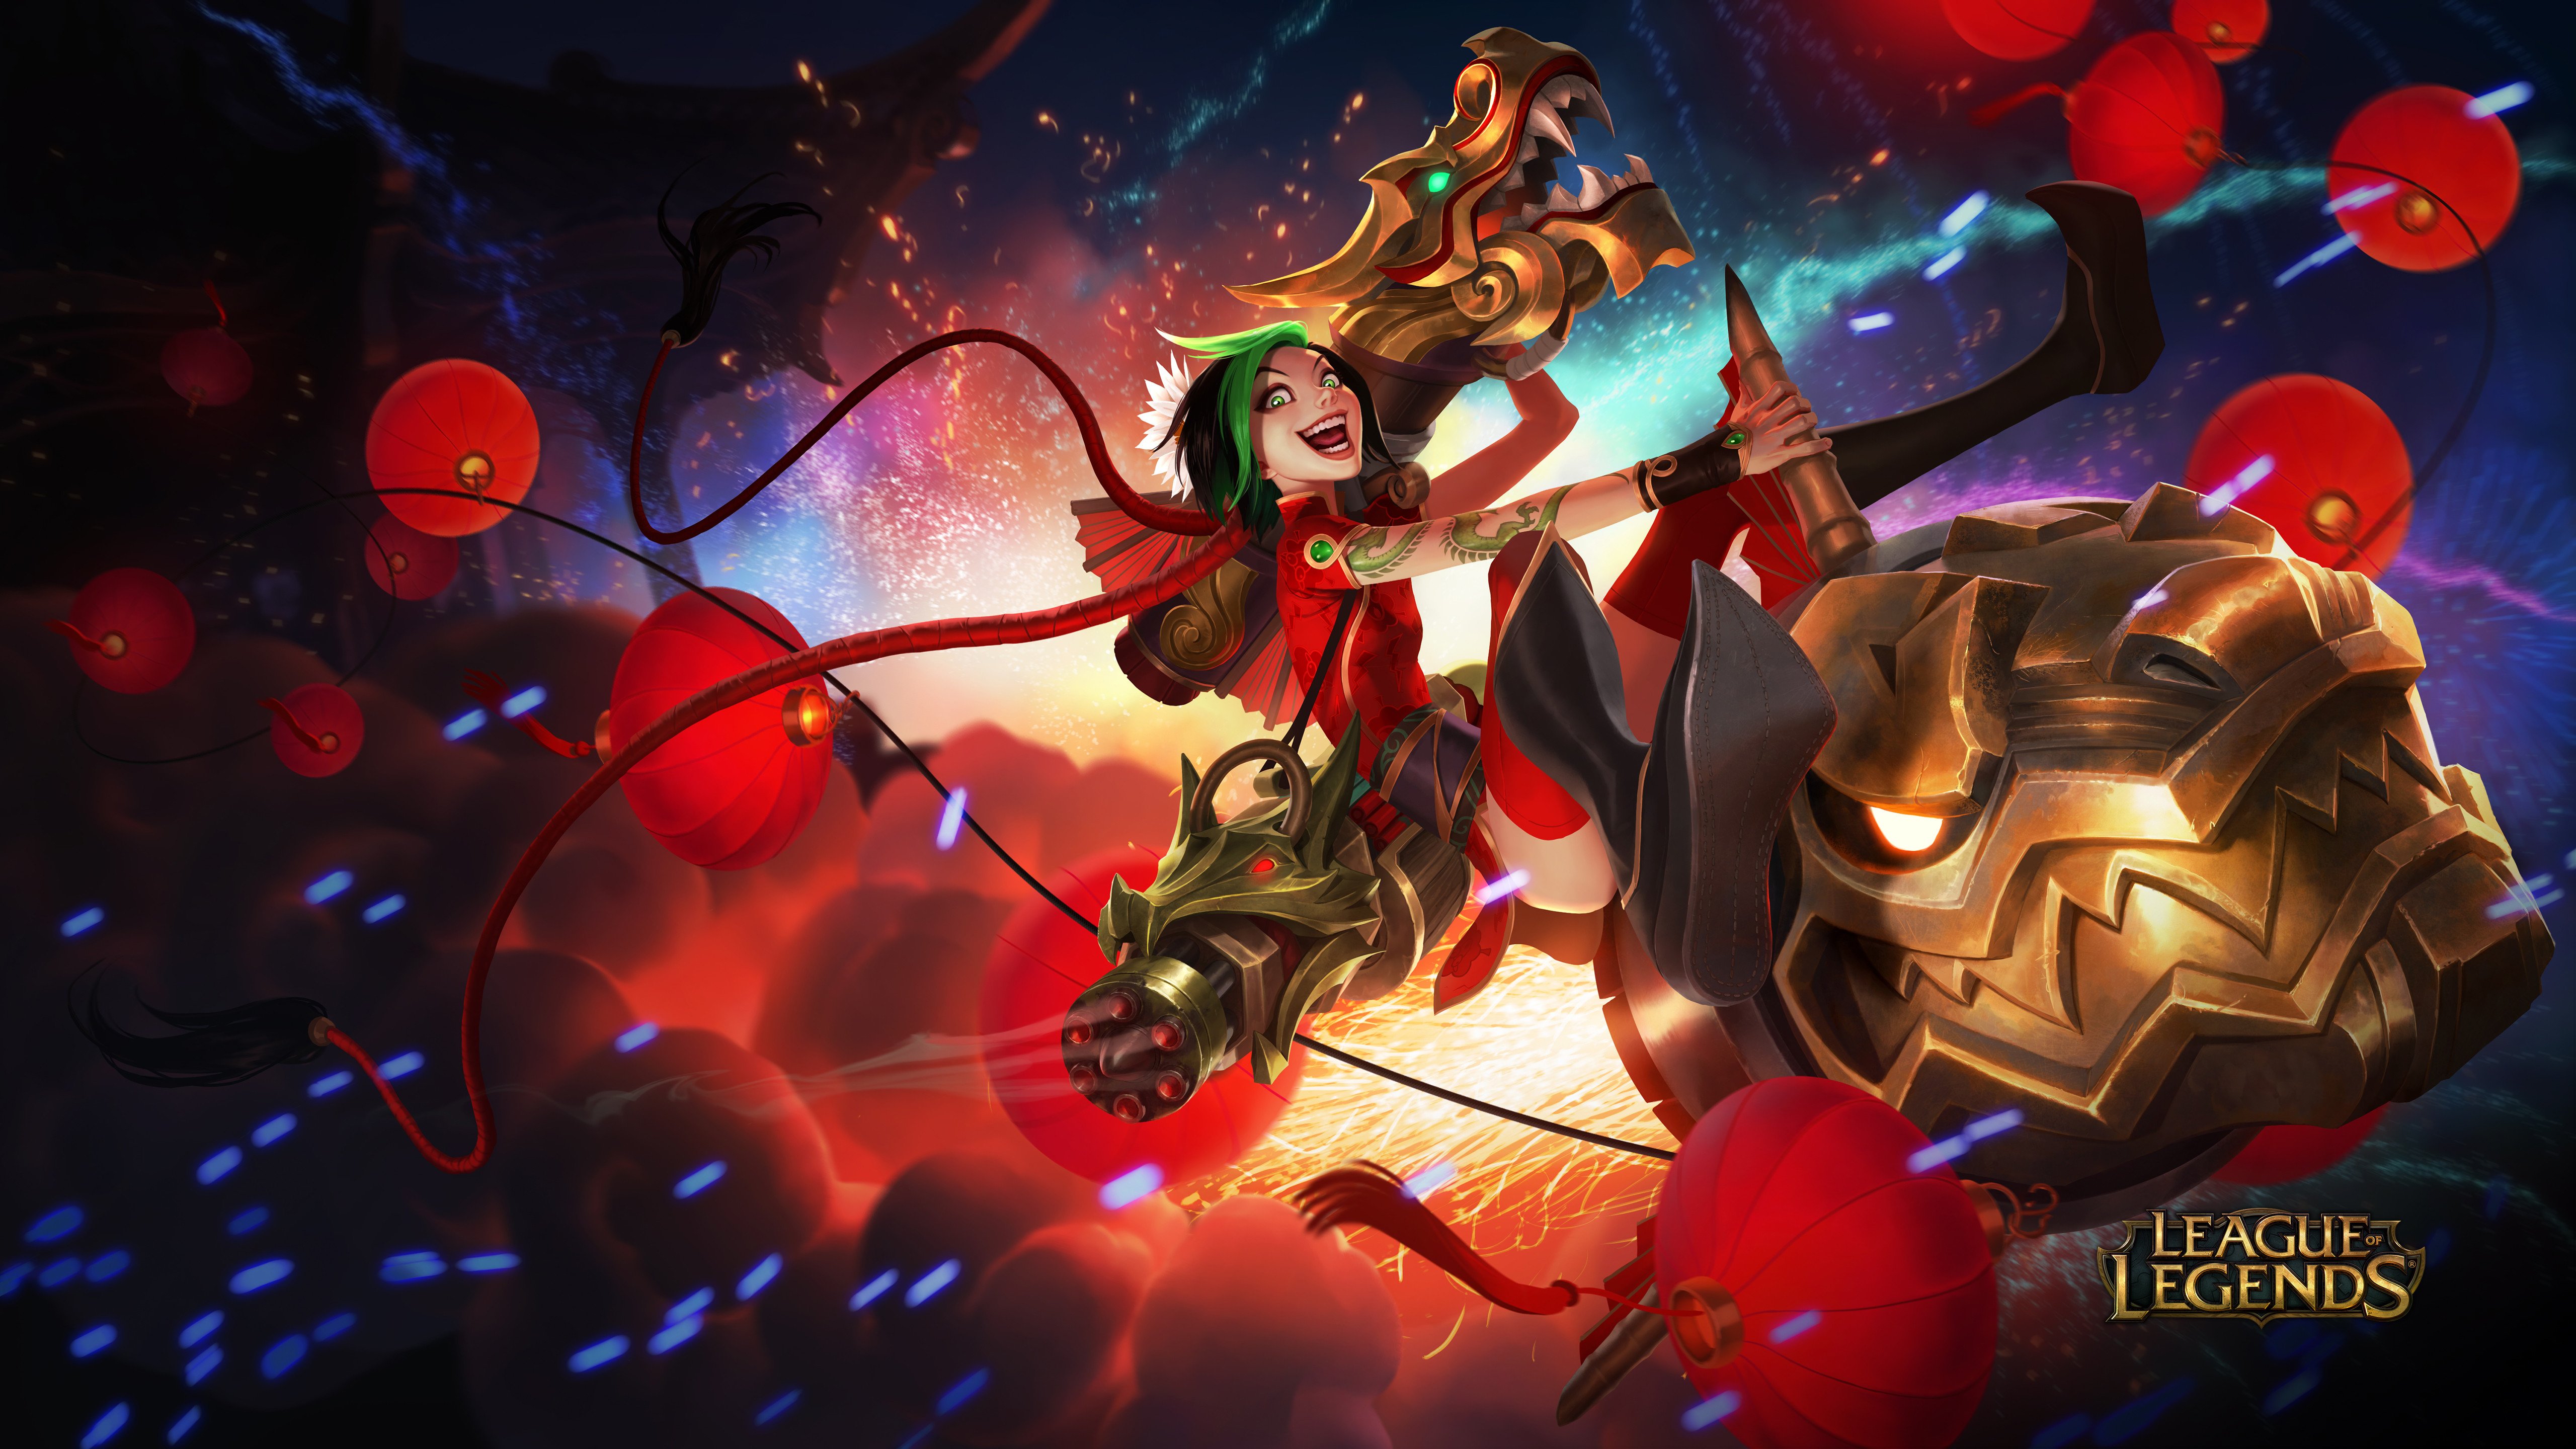 league of legends download for pc